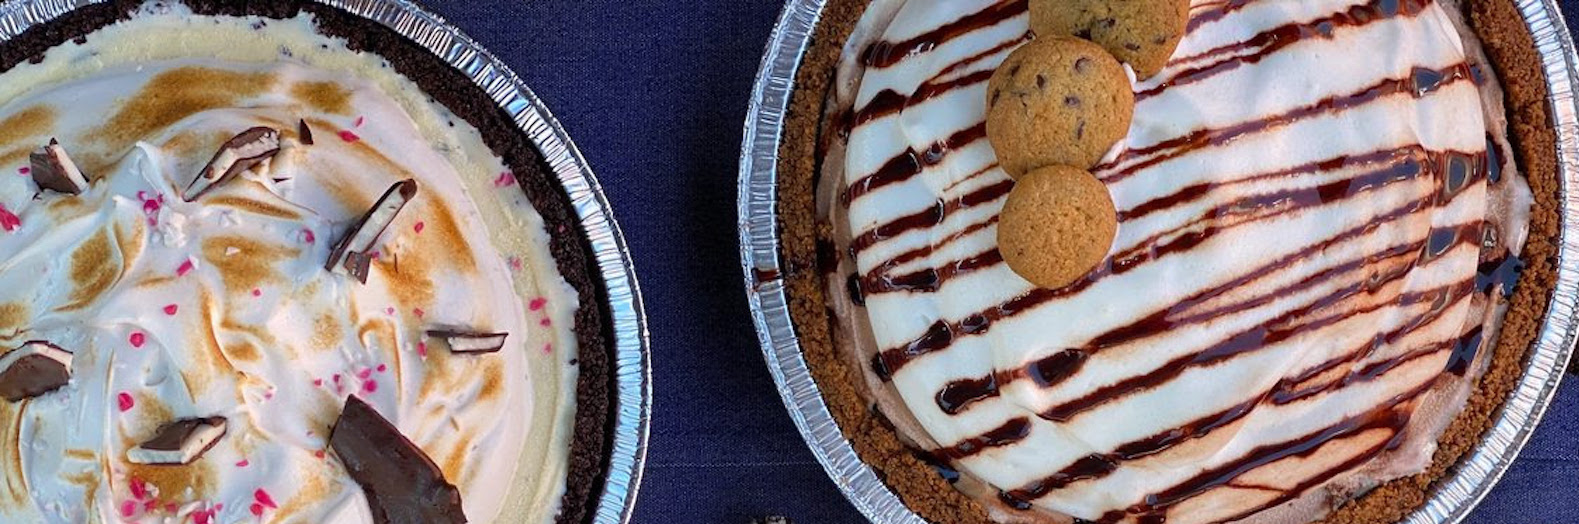 A Variety of Thanksgiving Ice Cream Pies